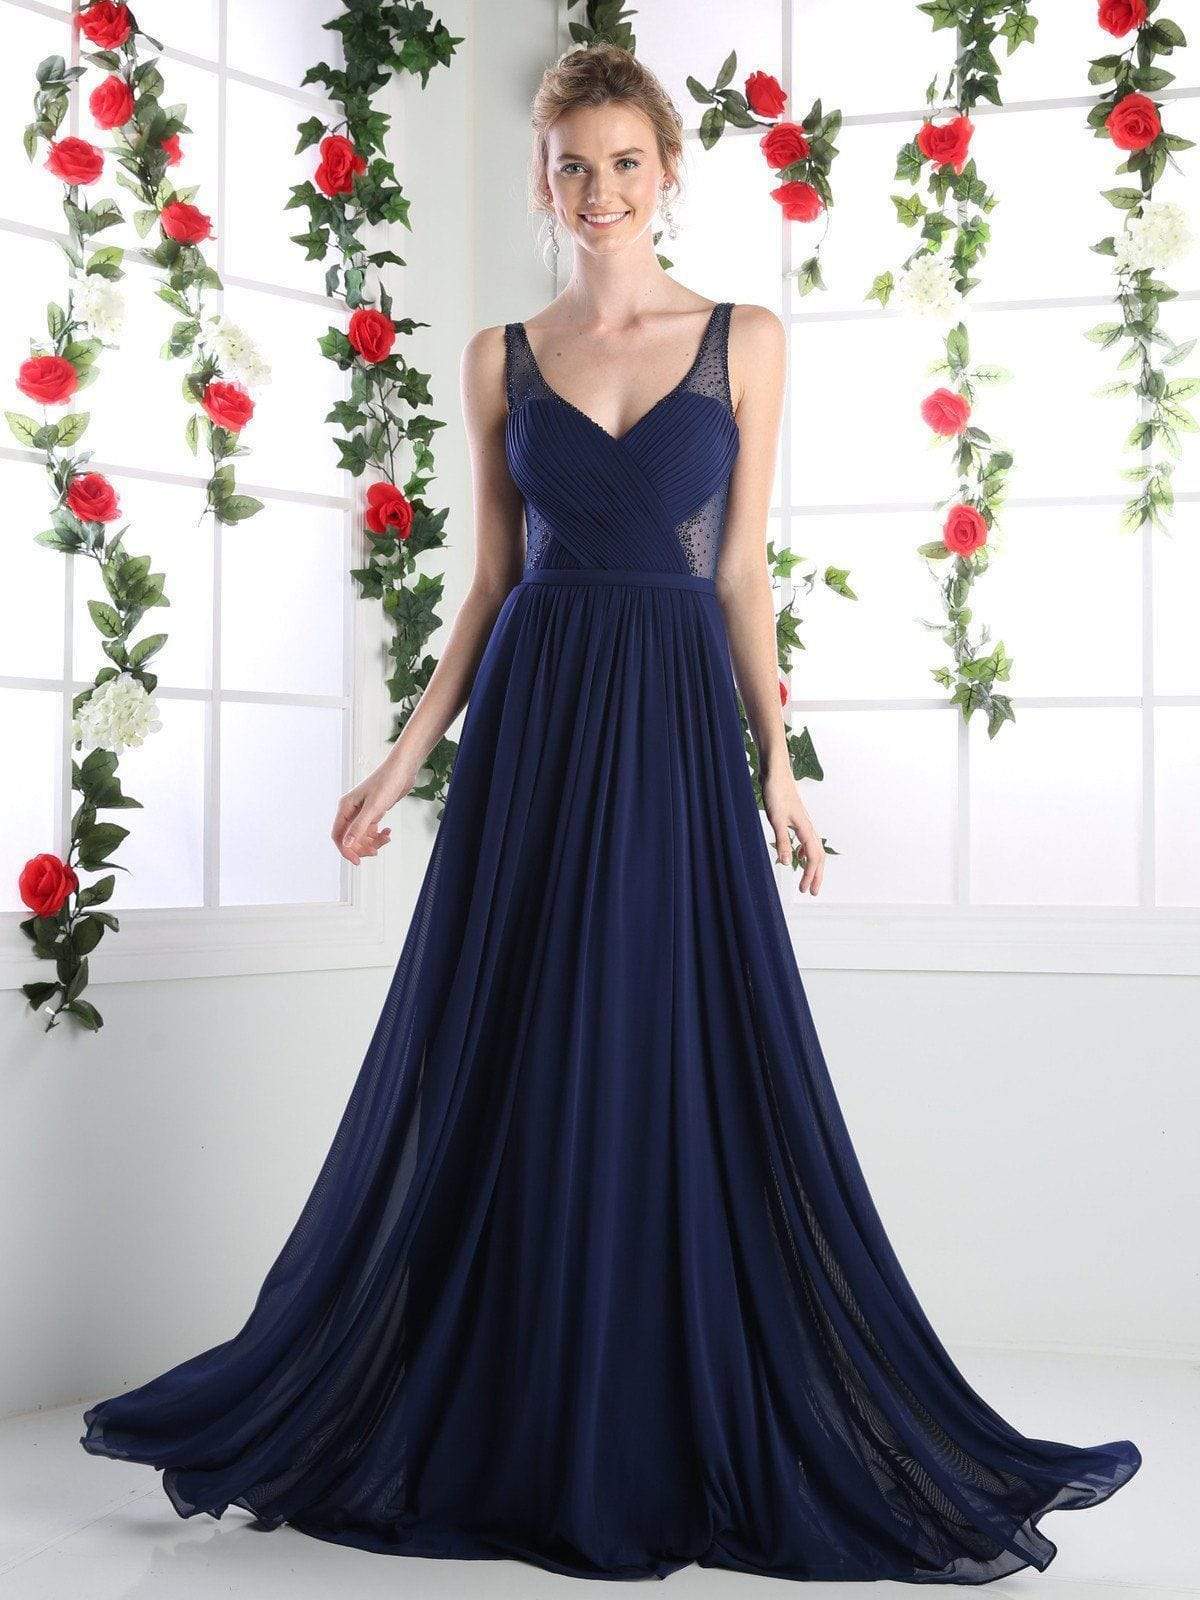 Cinderella Divine - Crisscrossed Ornate Illusion Panel Gown Special Occasion Dress 2 / Navy